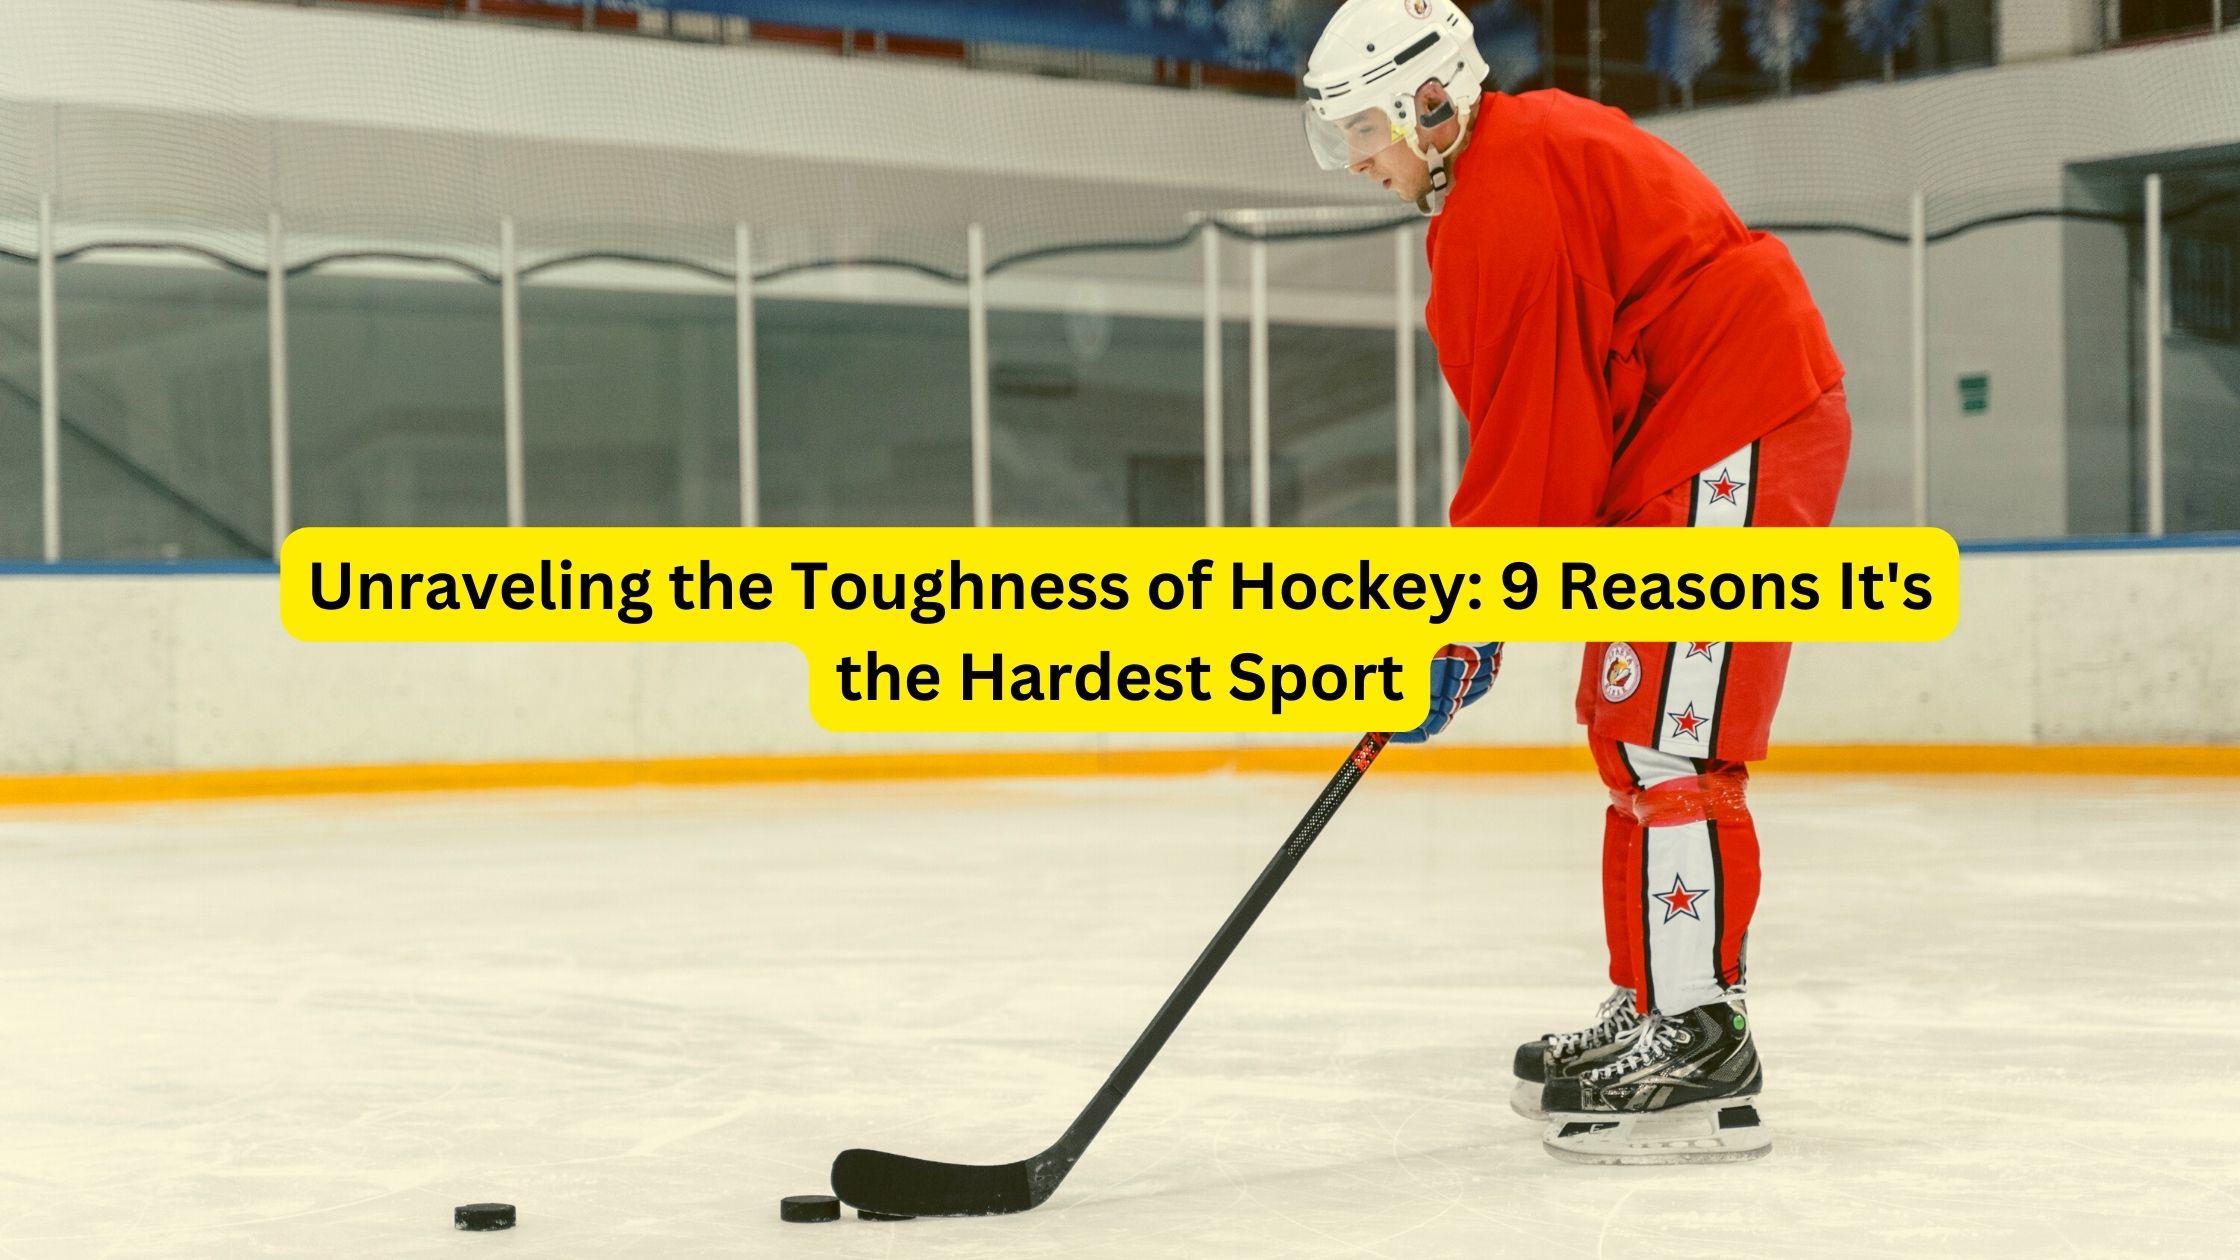 Unraveling the Toughness of Hockey: 9 Reasons It's the Hardest Sport